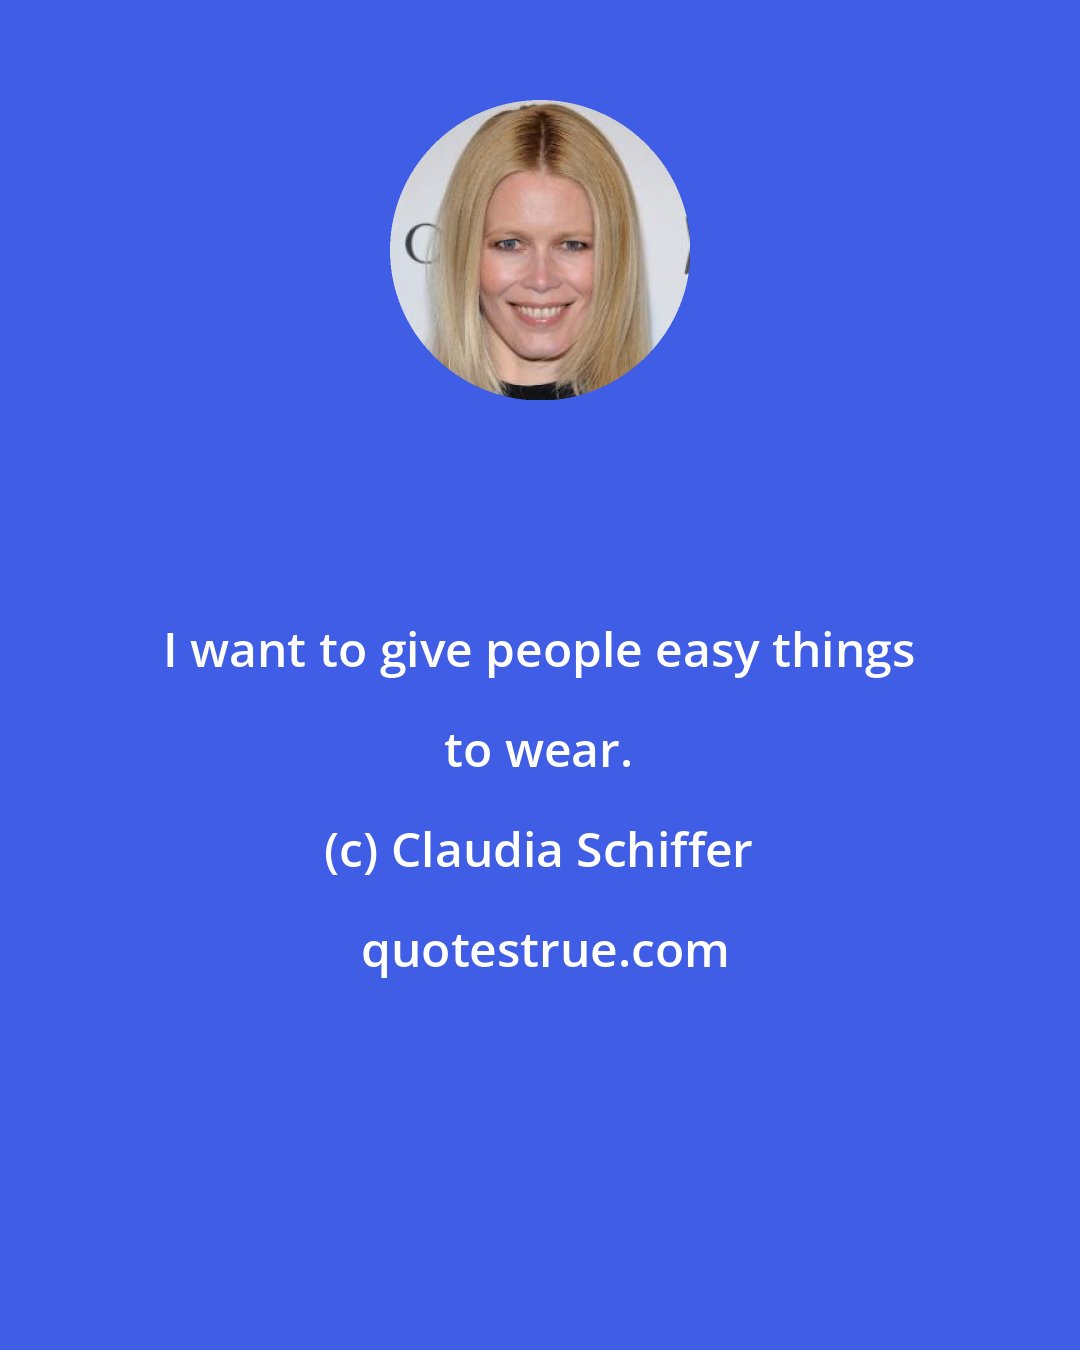 Claudia Schiffer: I want to give people easy things to wear.